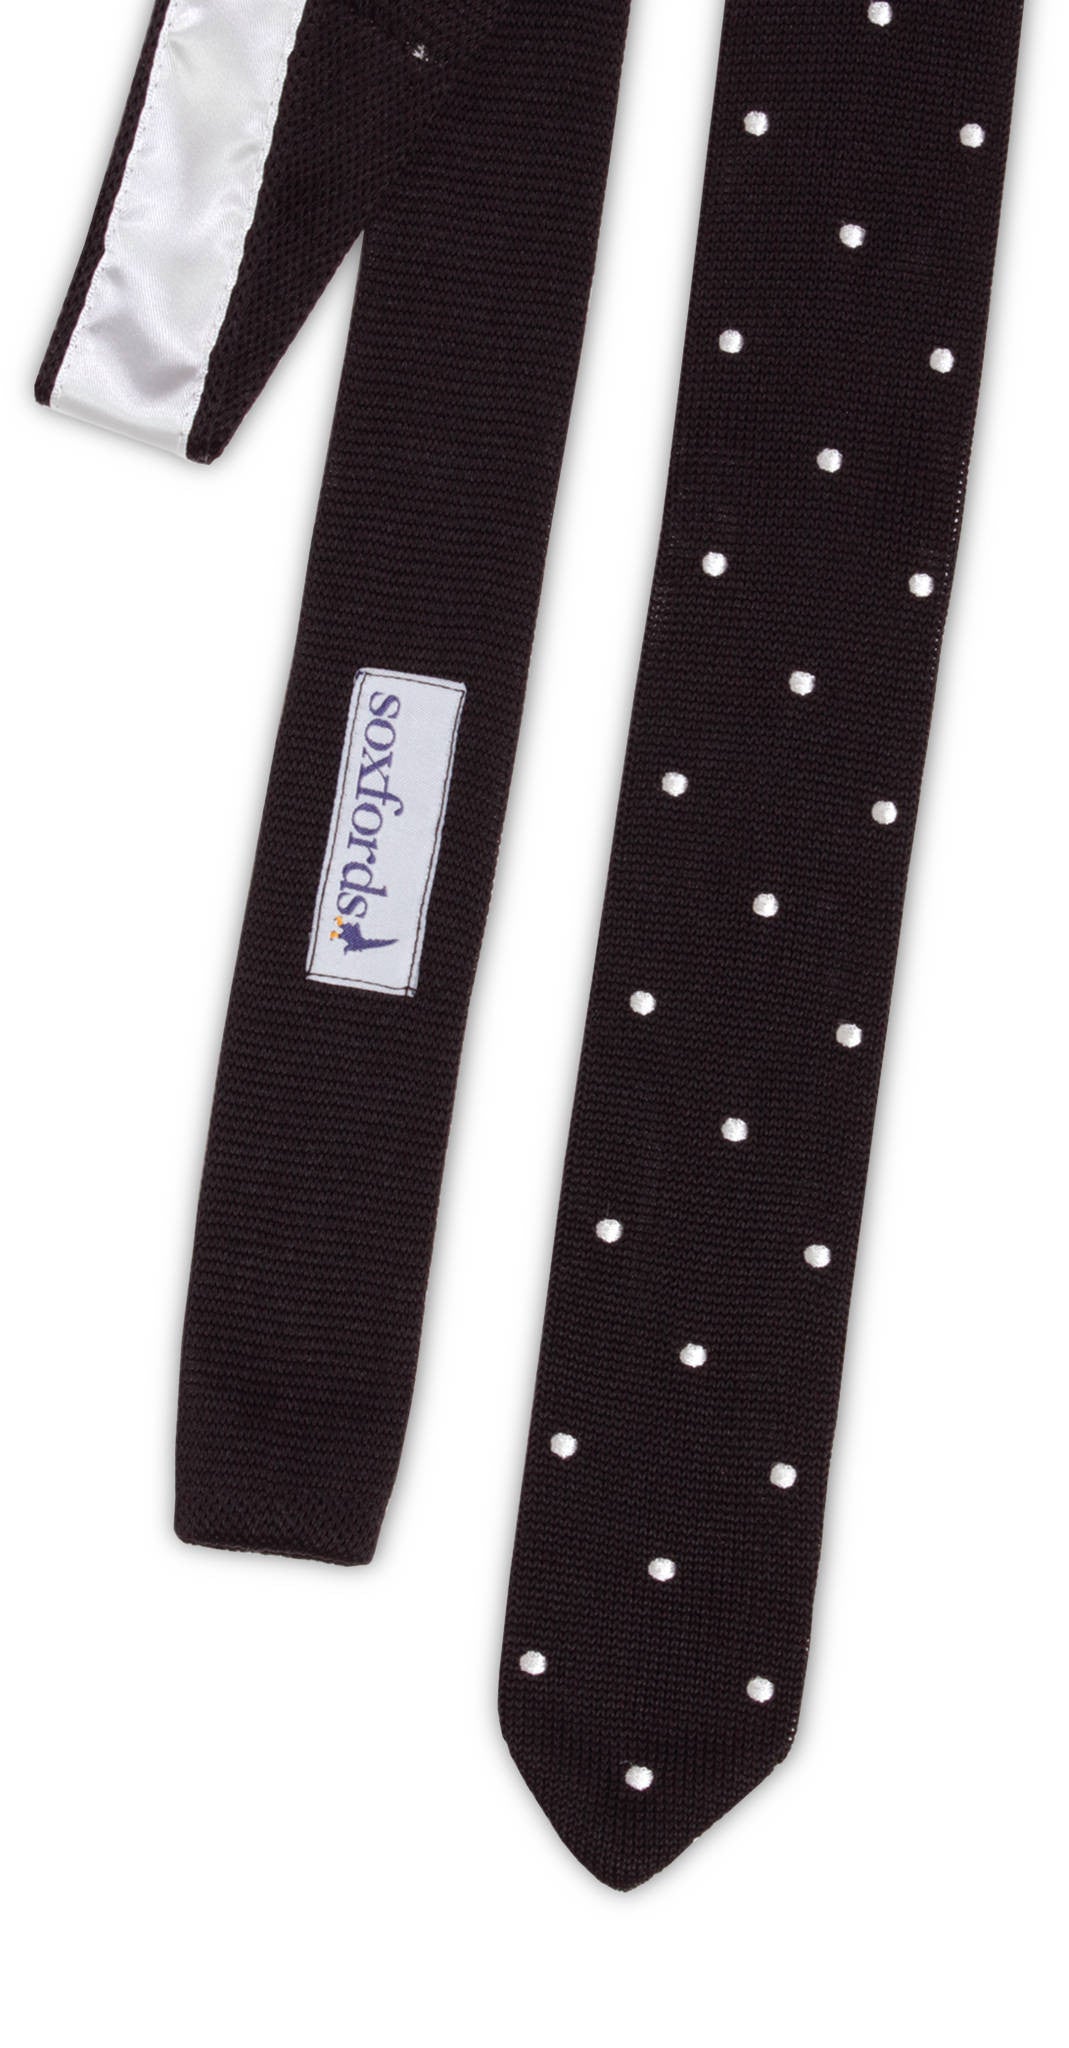 Black silk knit tie with white pin dots